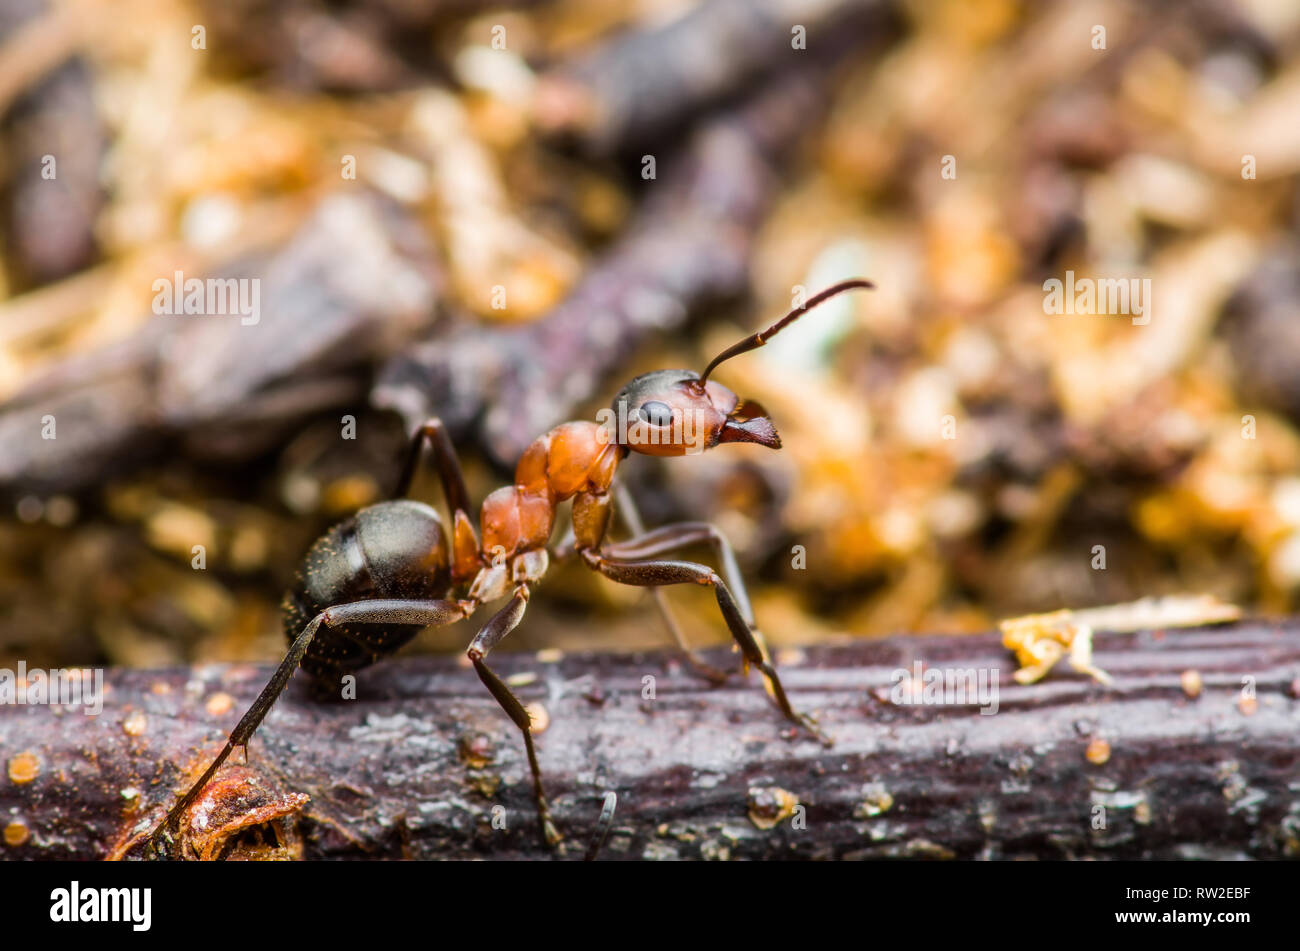 Red Ant Insect Macro Stock Photo